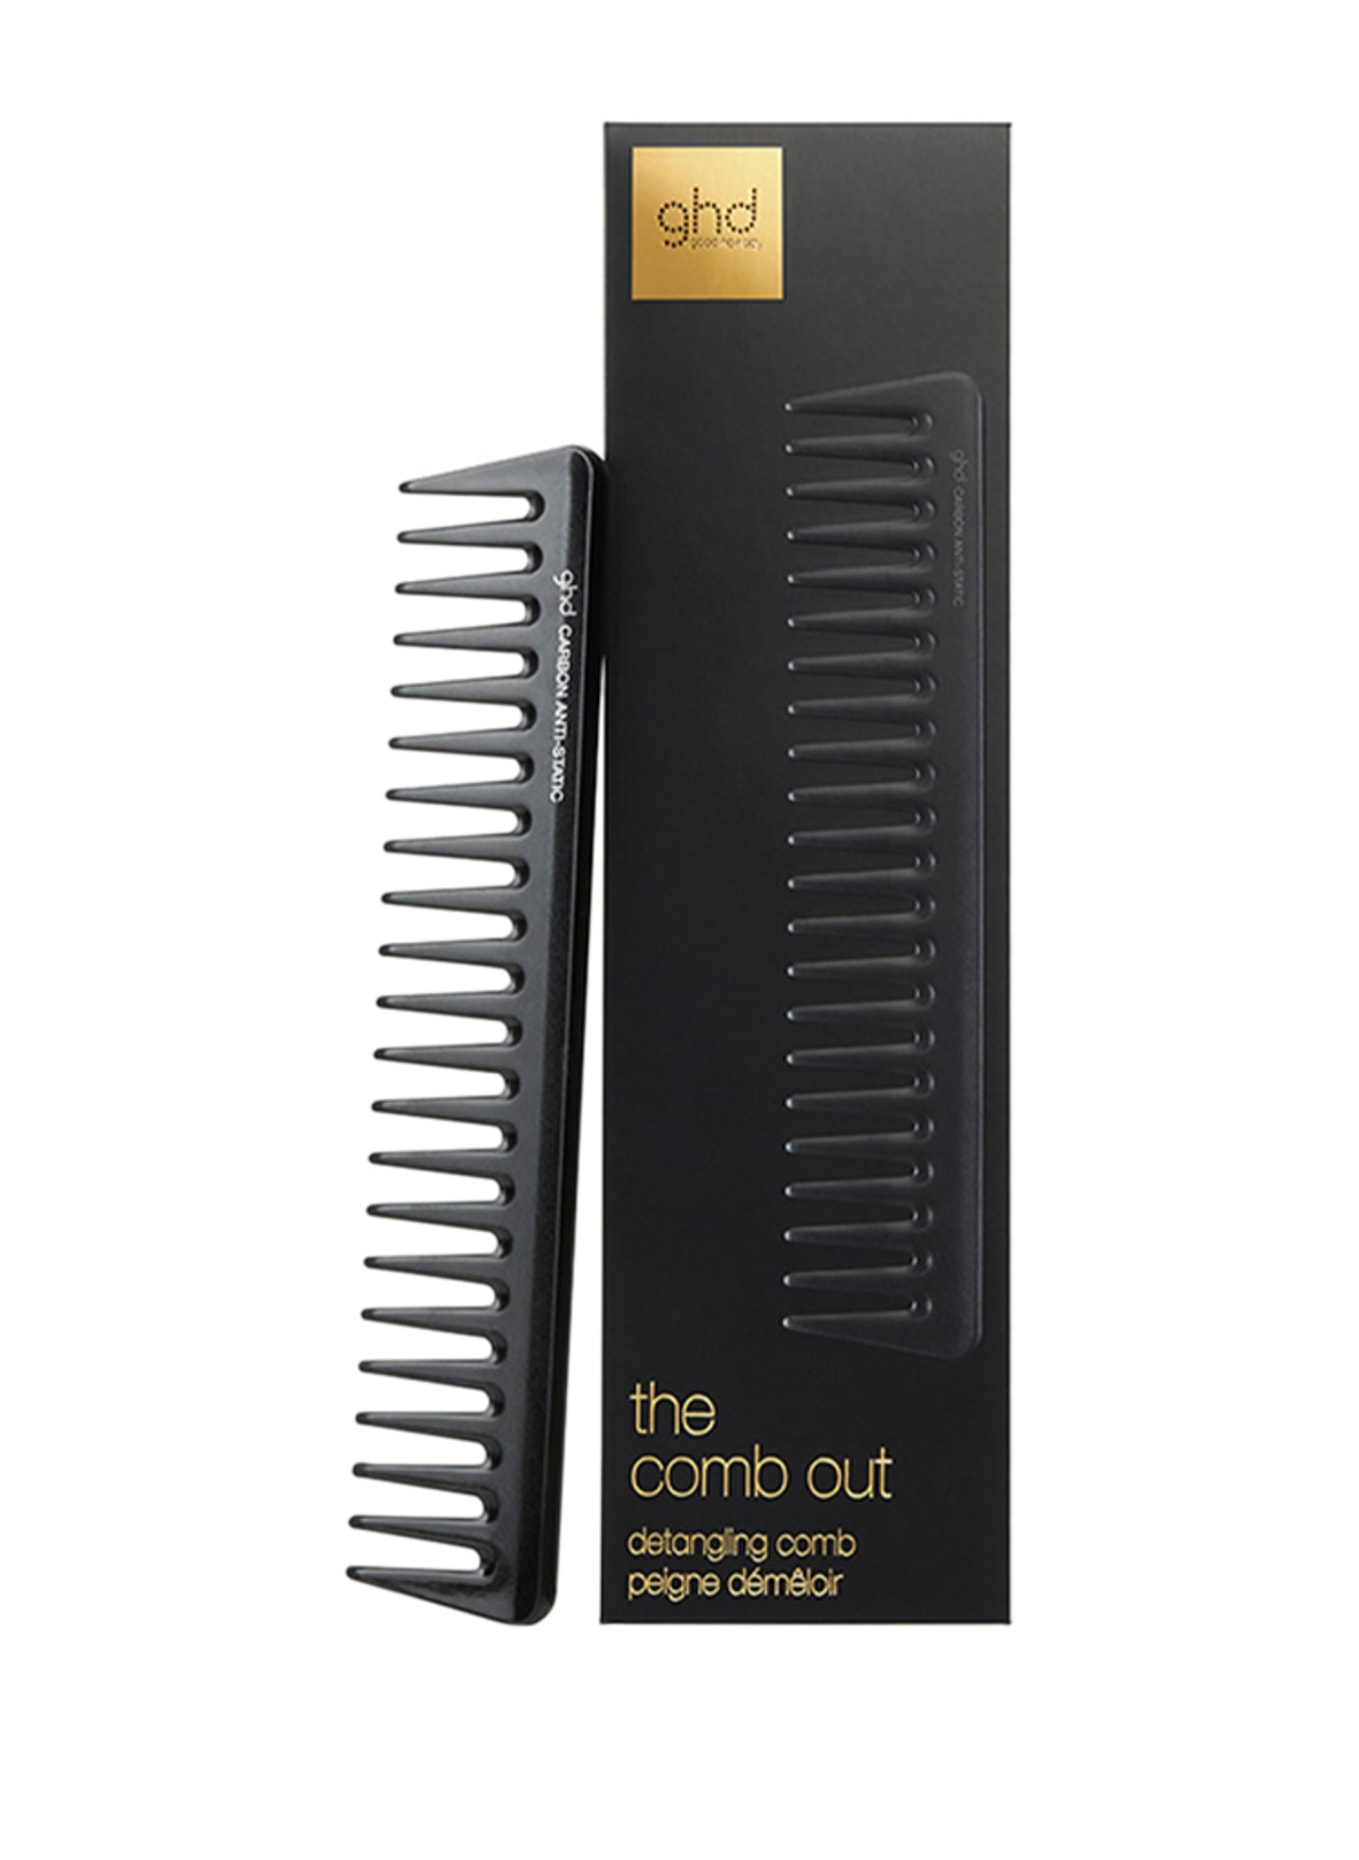 ghd THE COMB OUT (Obrázek 2)